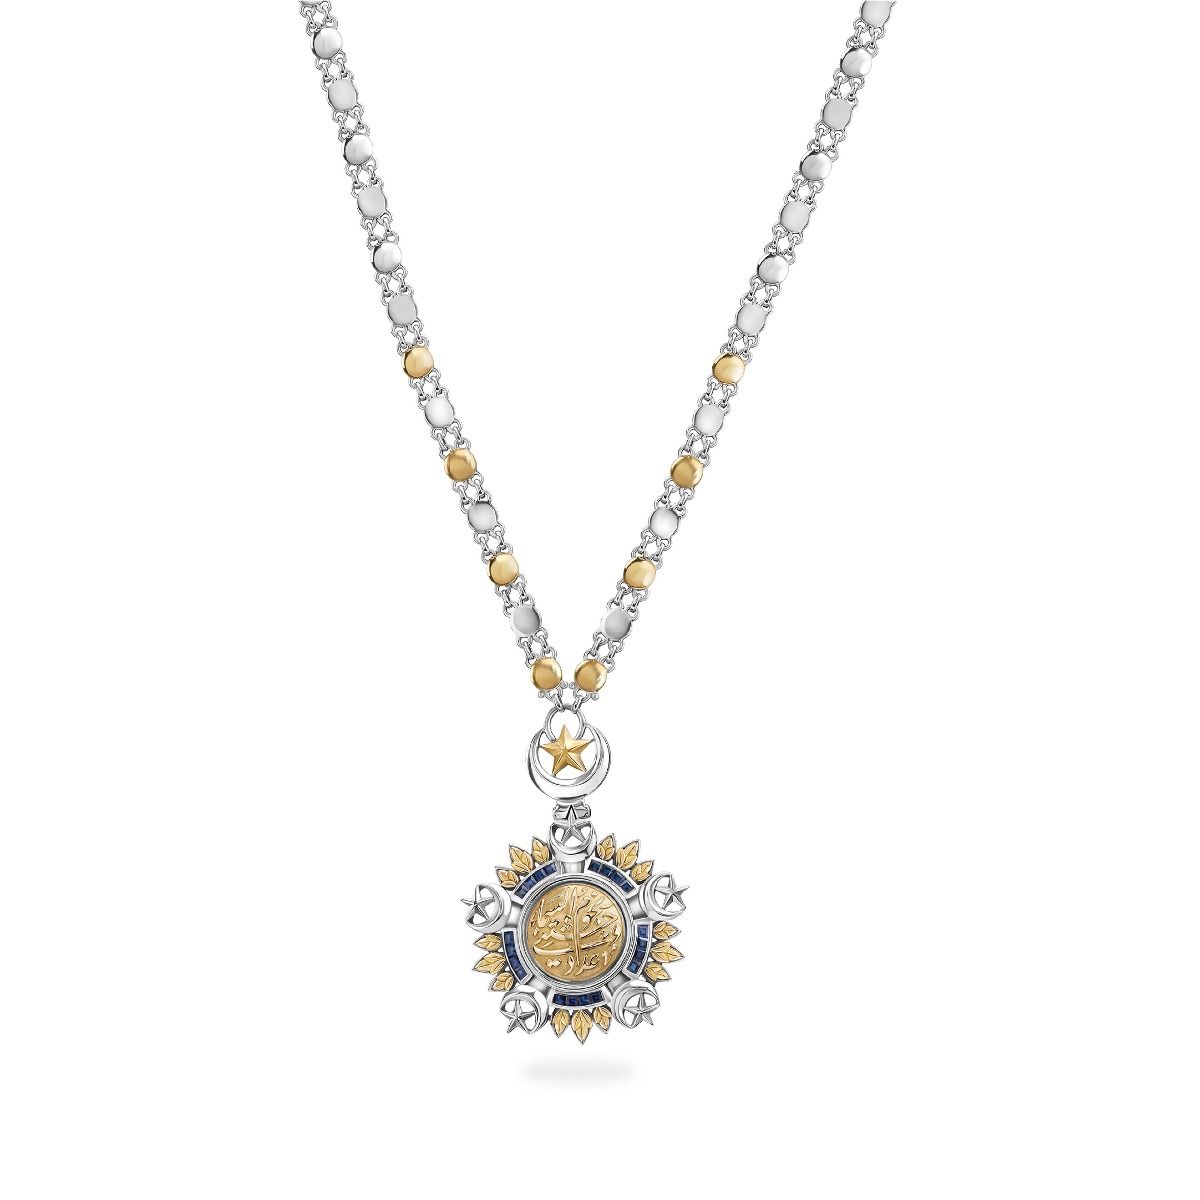 Souad Mohamed Necklace by Azza Fahmy - Designer Necklaces